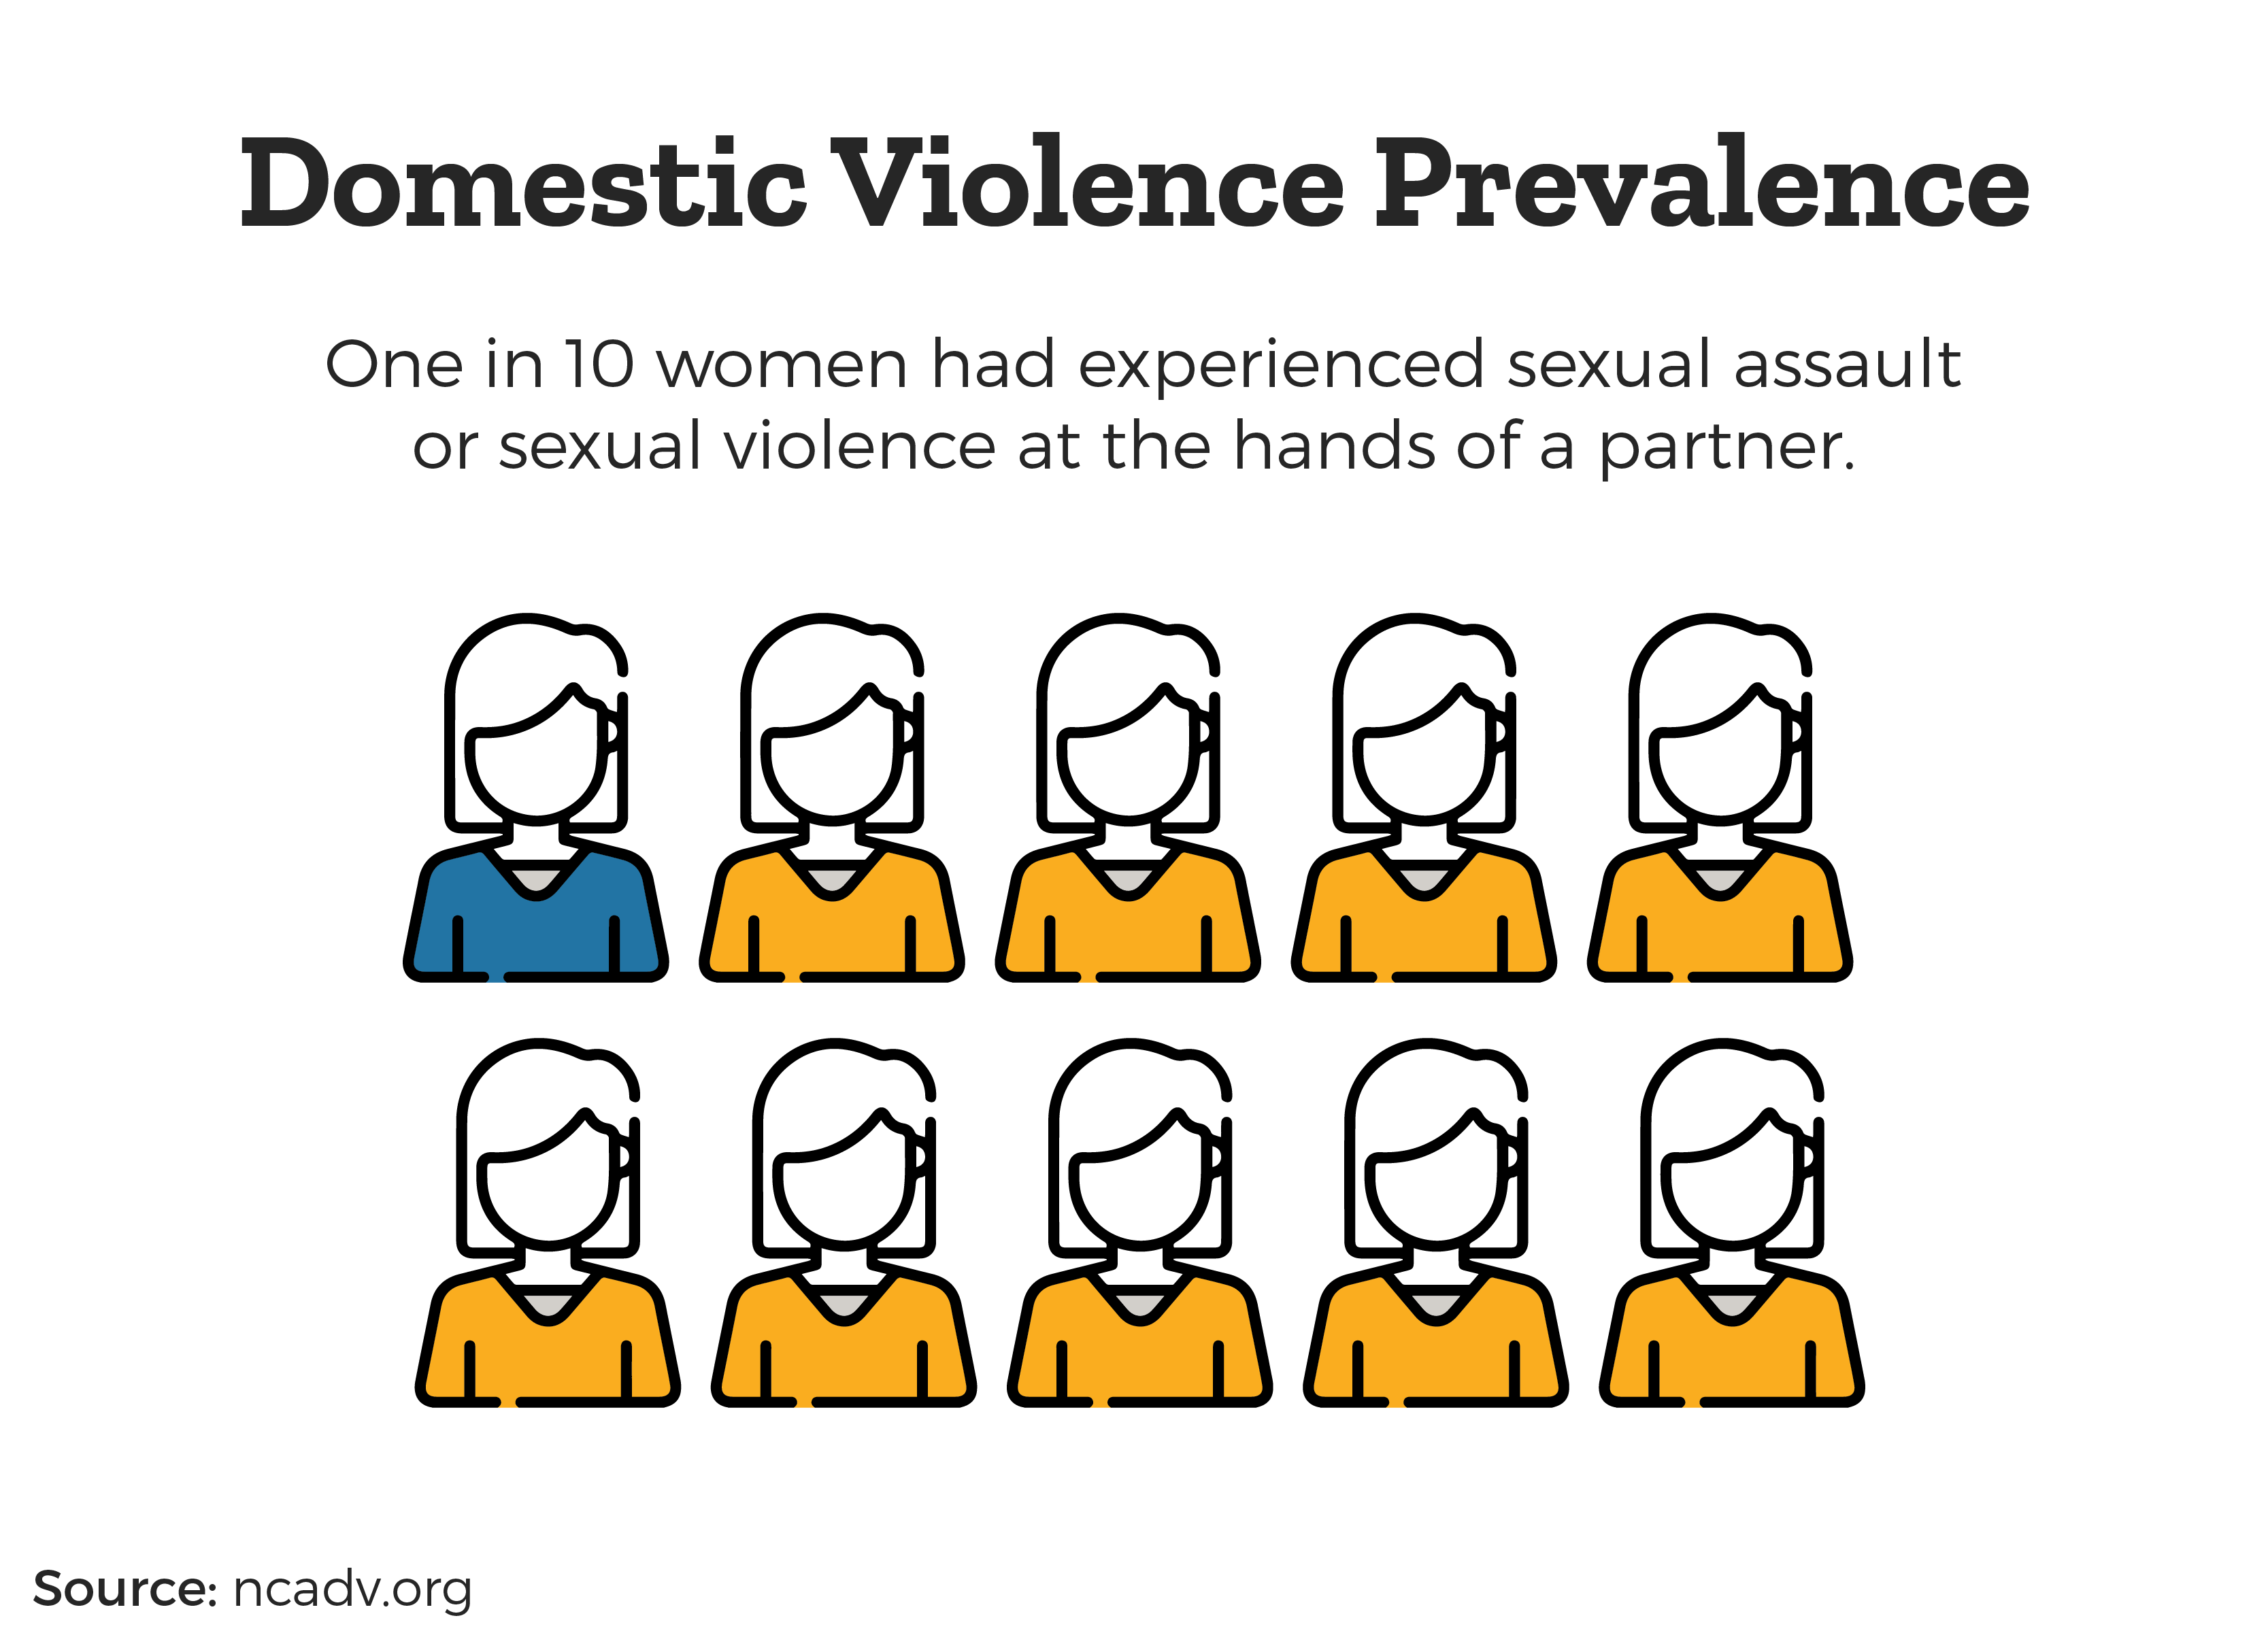 Domestic Violence Prevalence - one in 10 women had experienced sexual assault or sexual violence at the hands of a partner.